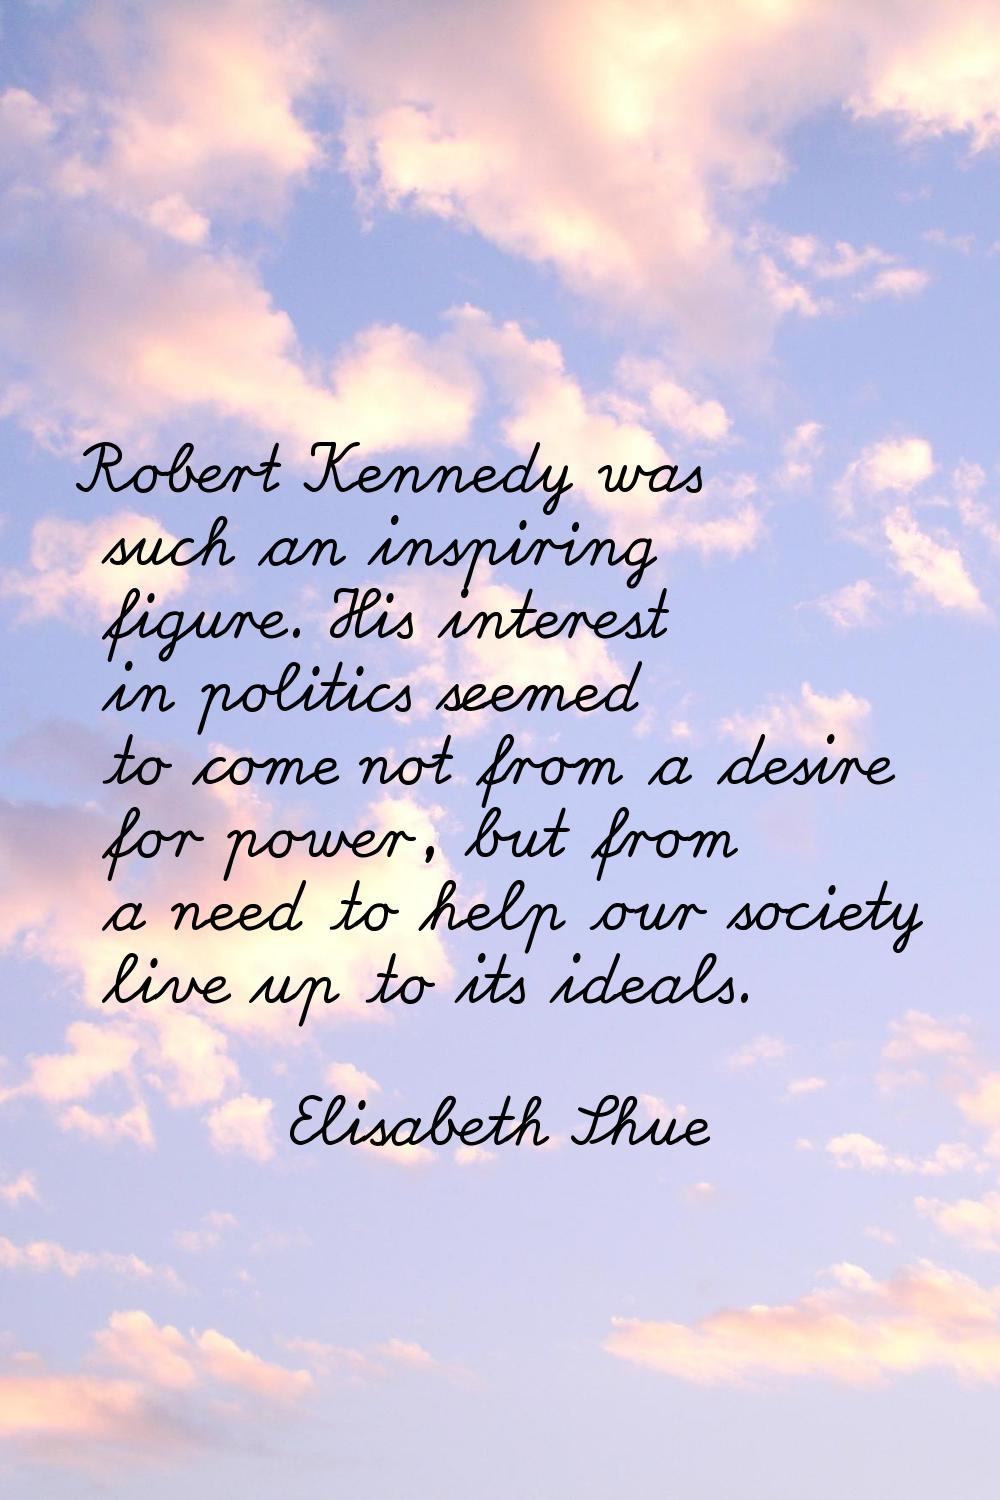 Robert Kennedy was such an inspiring figure. His interest in politics seemed to come not from a des